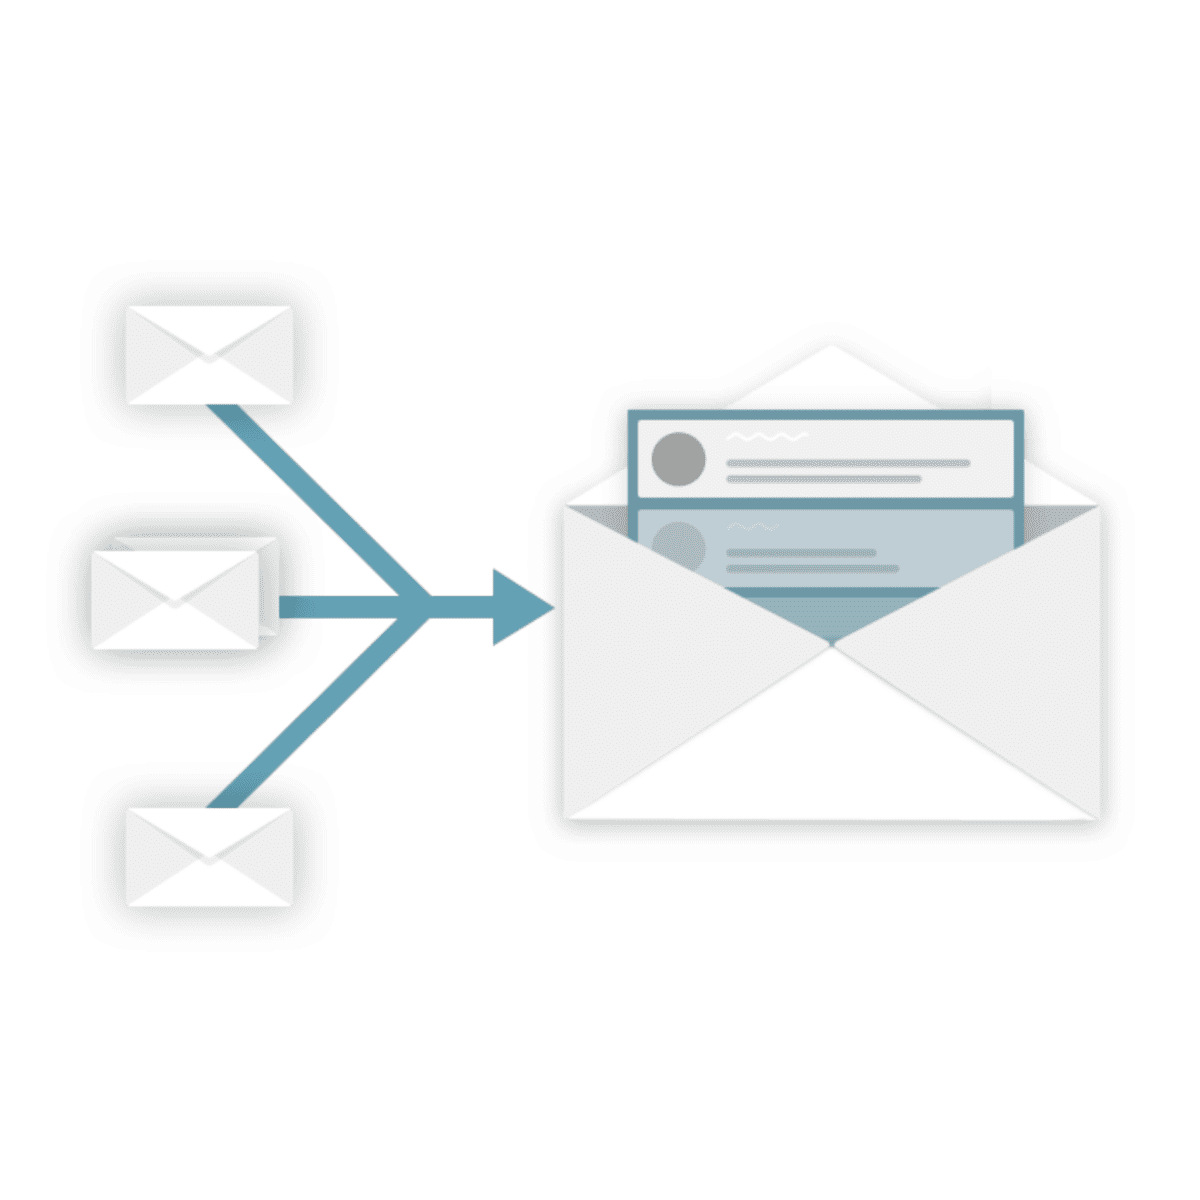 animated image for email marketing